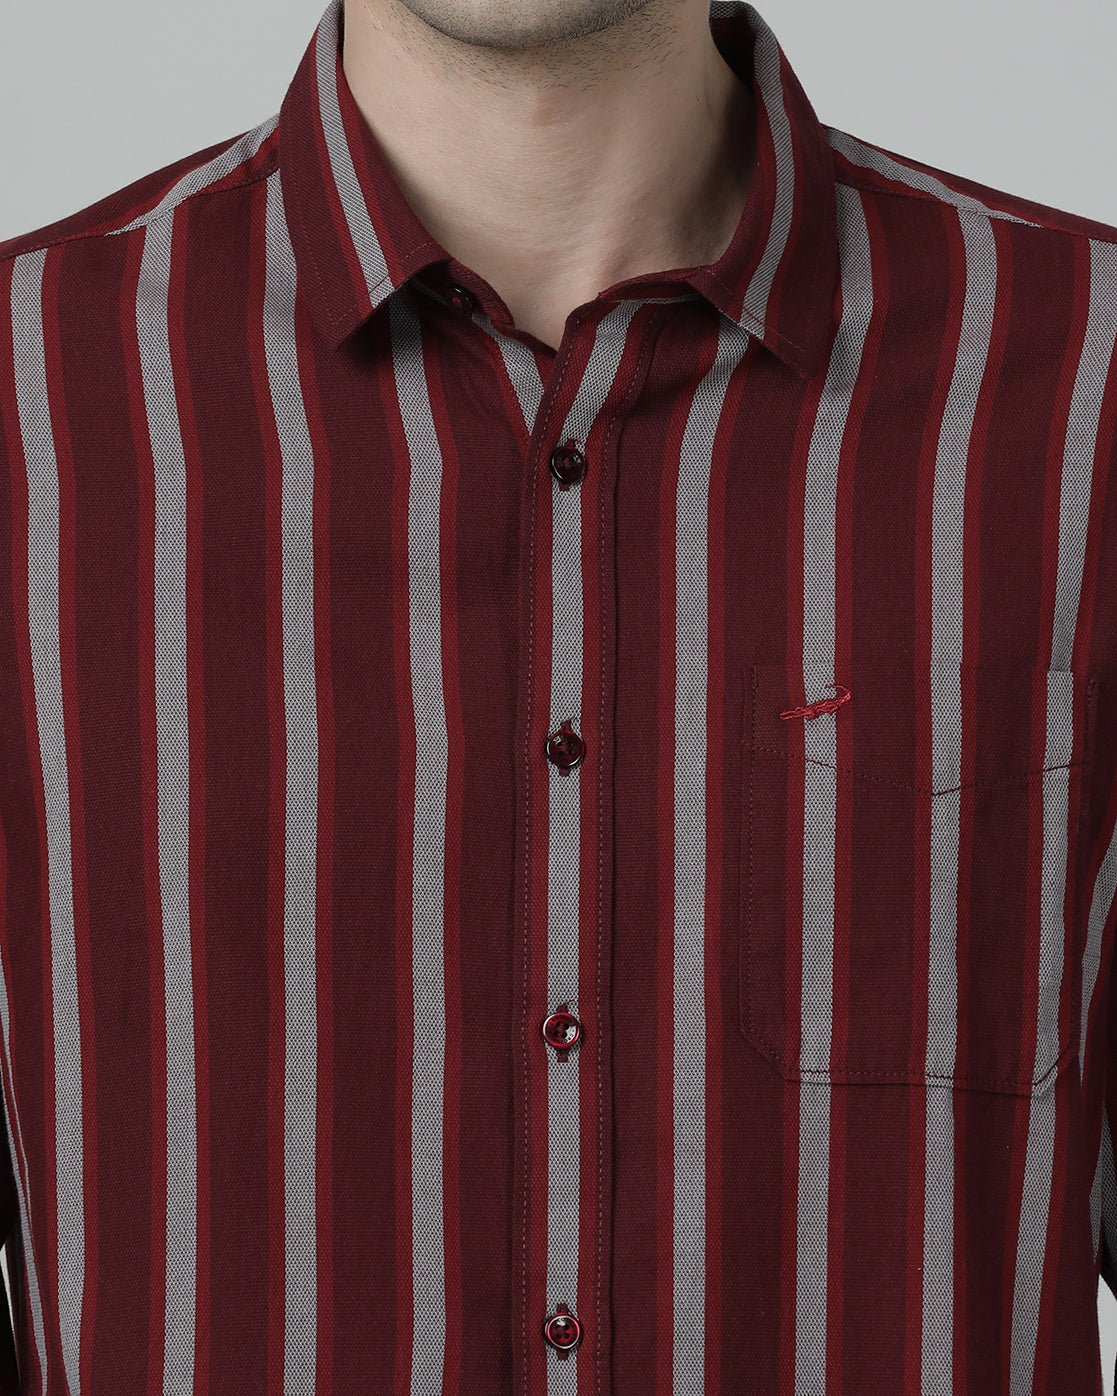 Casual Stripe Comfort Fit Full Sleeve Maroon Shirt with Collar